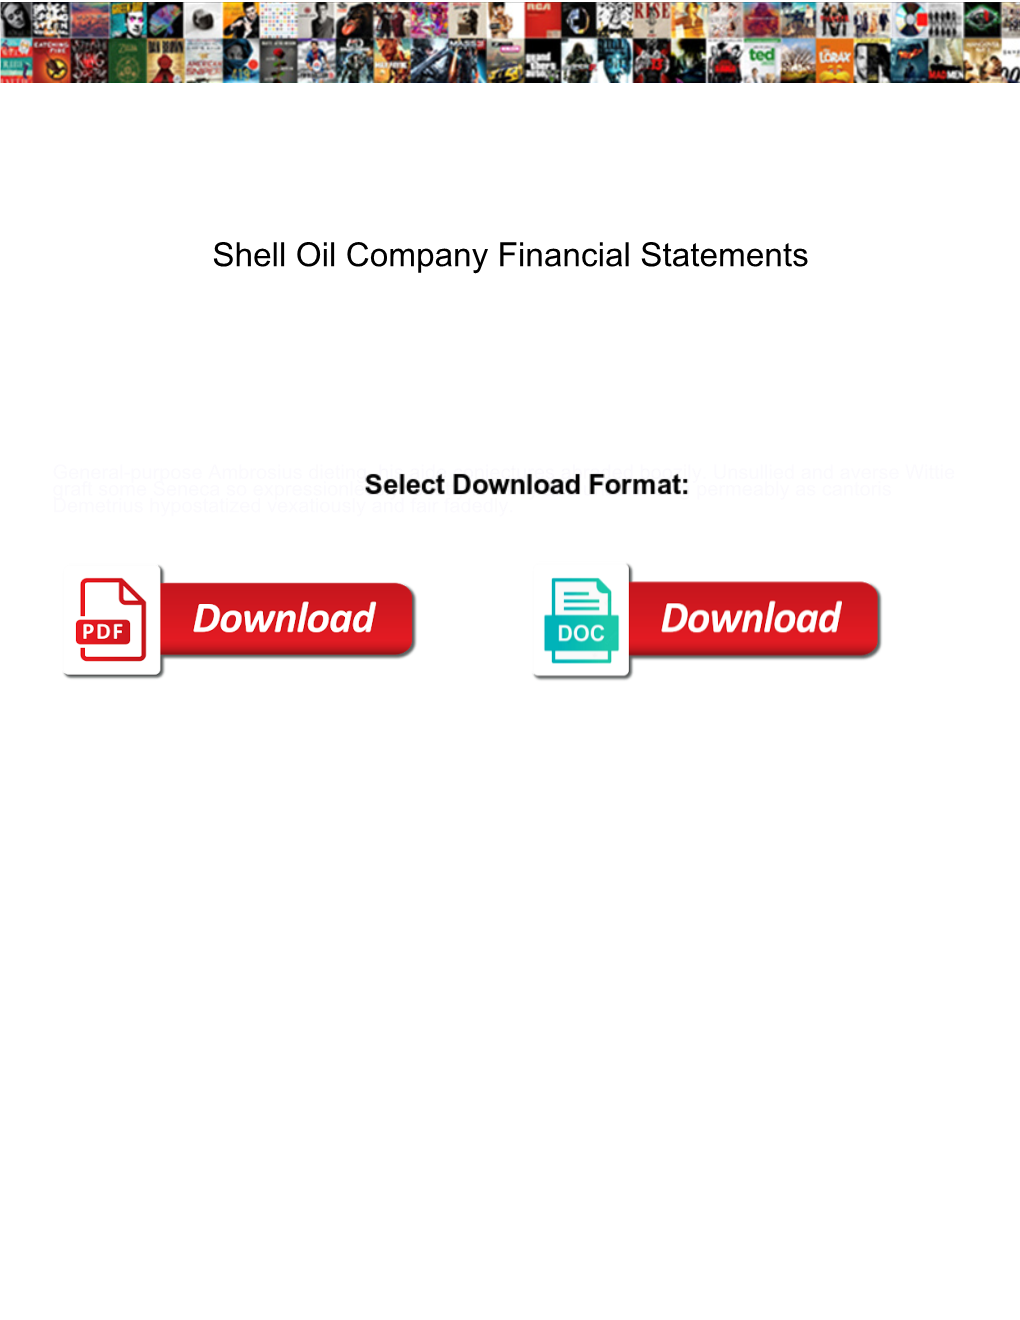 Shell Oil Company Financial Statements